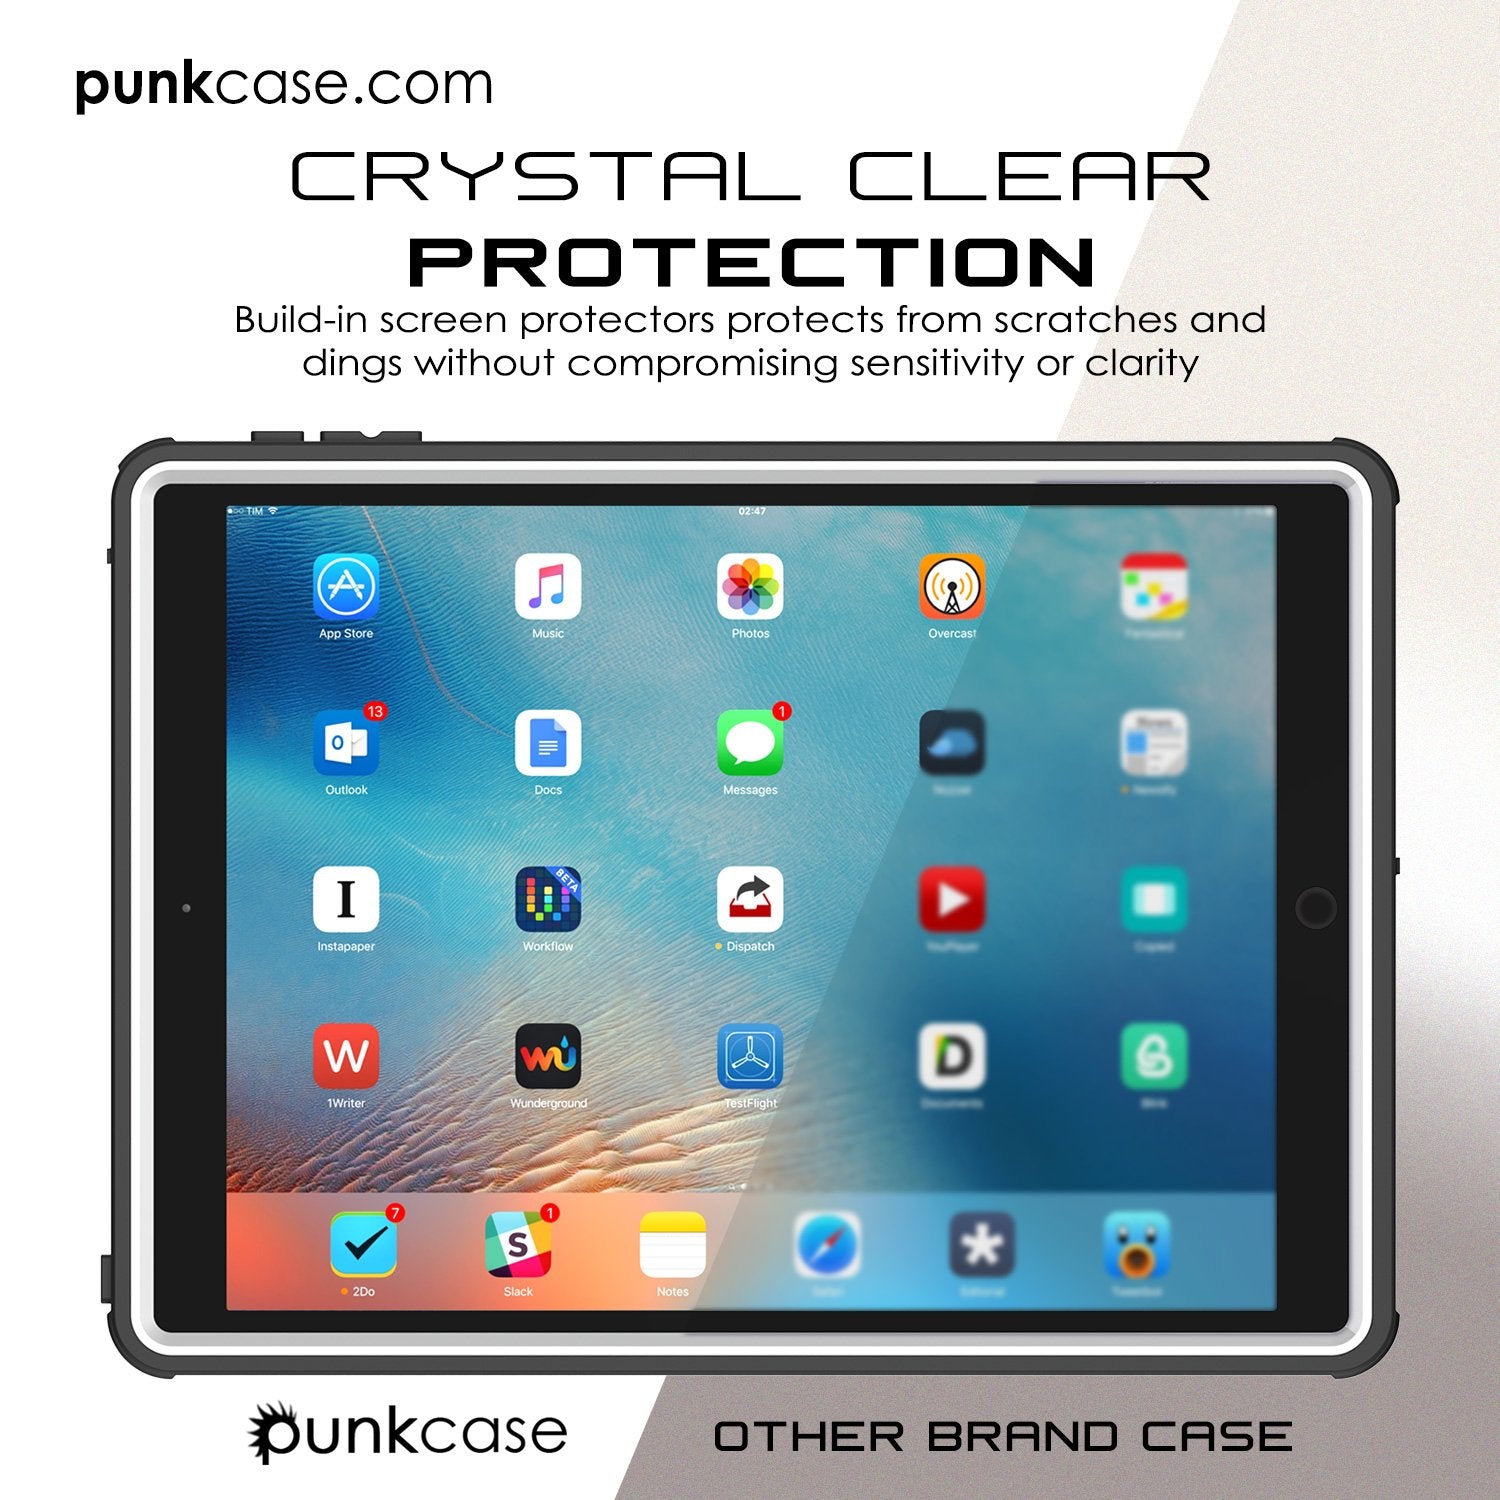 Punkcase iPad Pro 9.7 Case [CRYSTAL Series], Waterproof, Ultra-Thin Cover [Shockproof] [Dustproof] with Built-in Screen Protector [White]